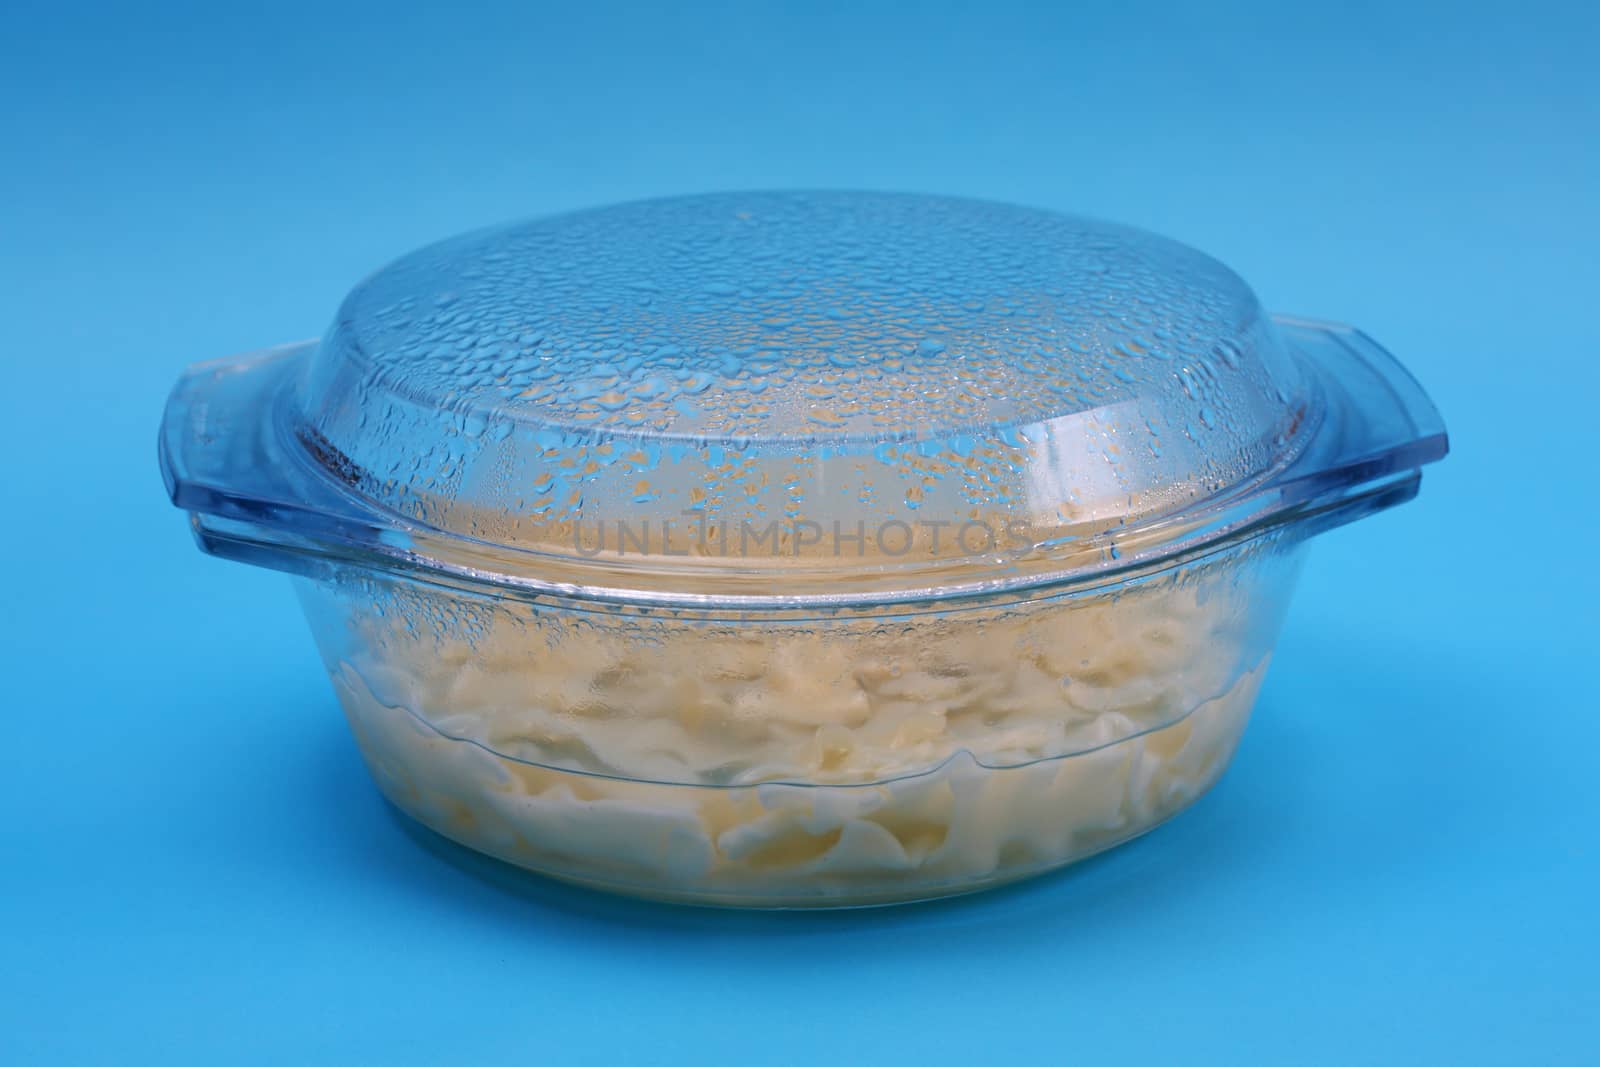 Raw pasta in a glass dish.